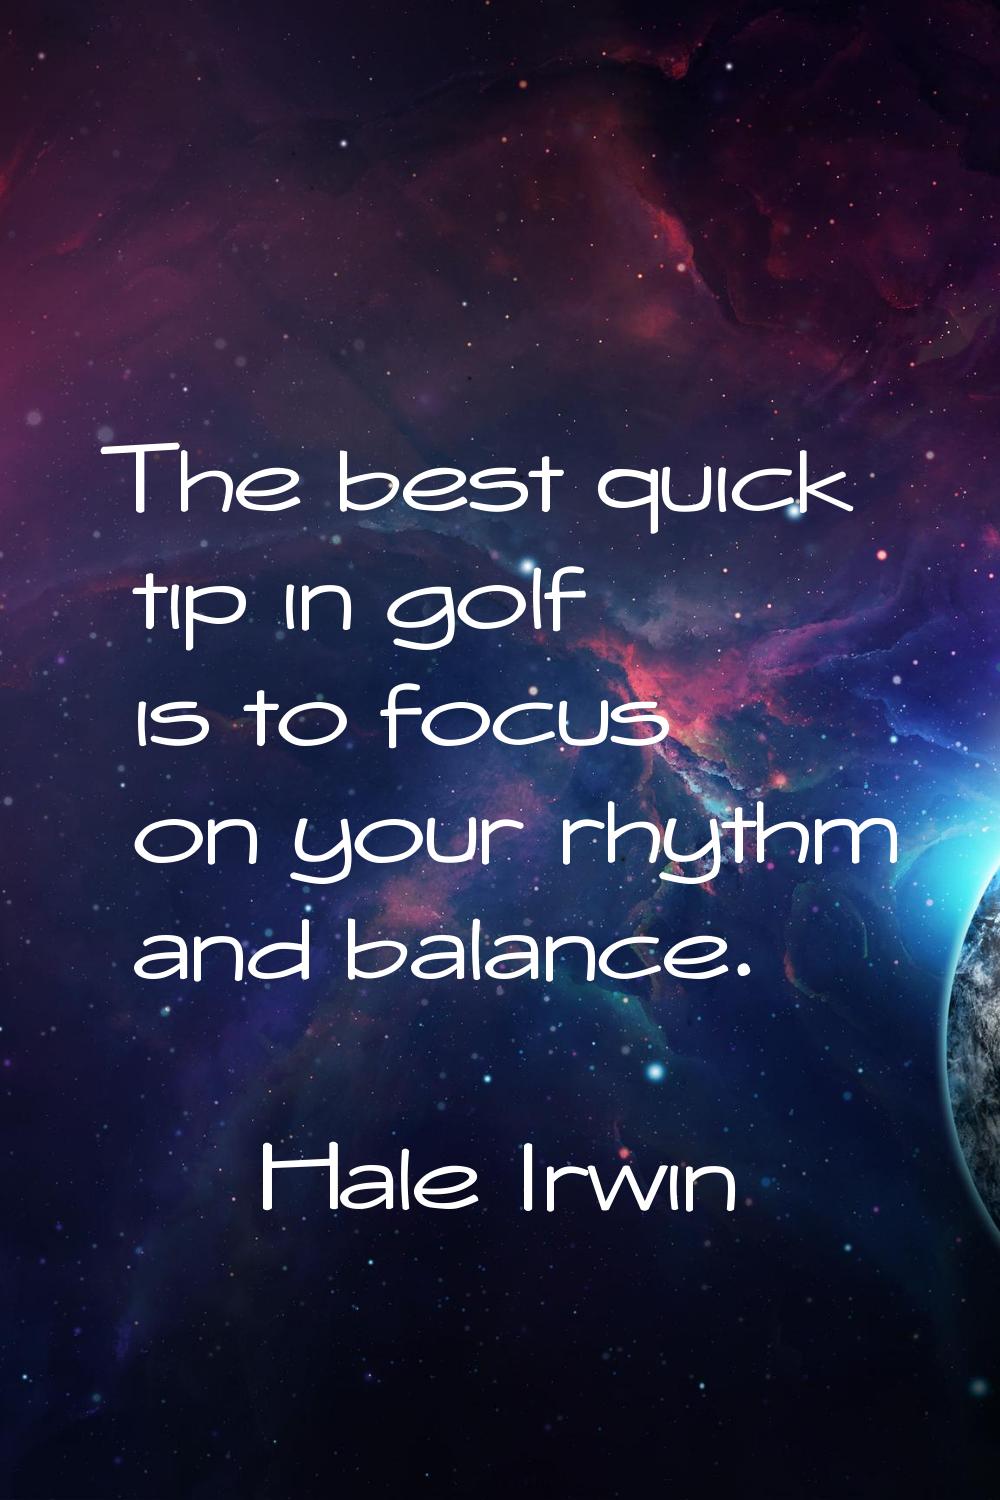 The best quick tip in golf is to focus on your rhythm and balance.